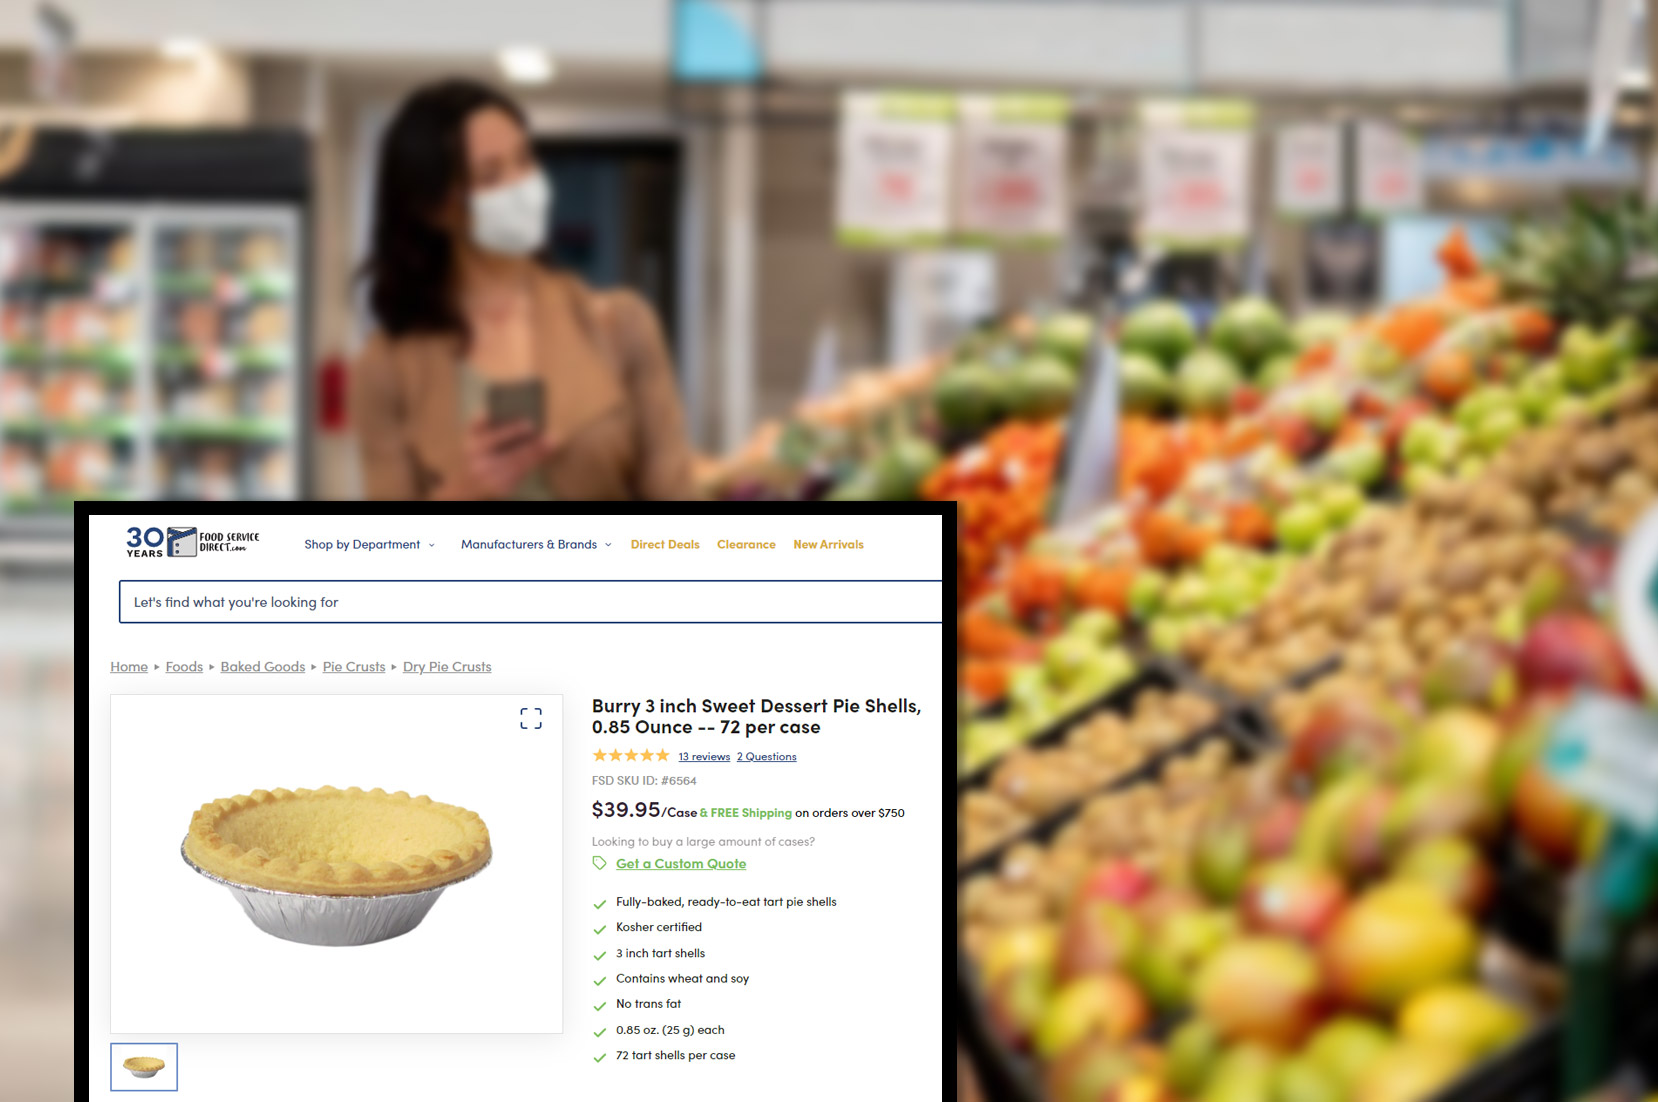 foodservicedirect-comproduct-pricing-information-and-image-scraping-services